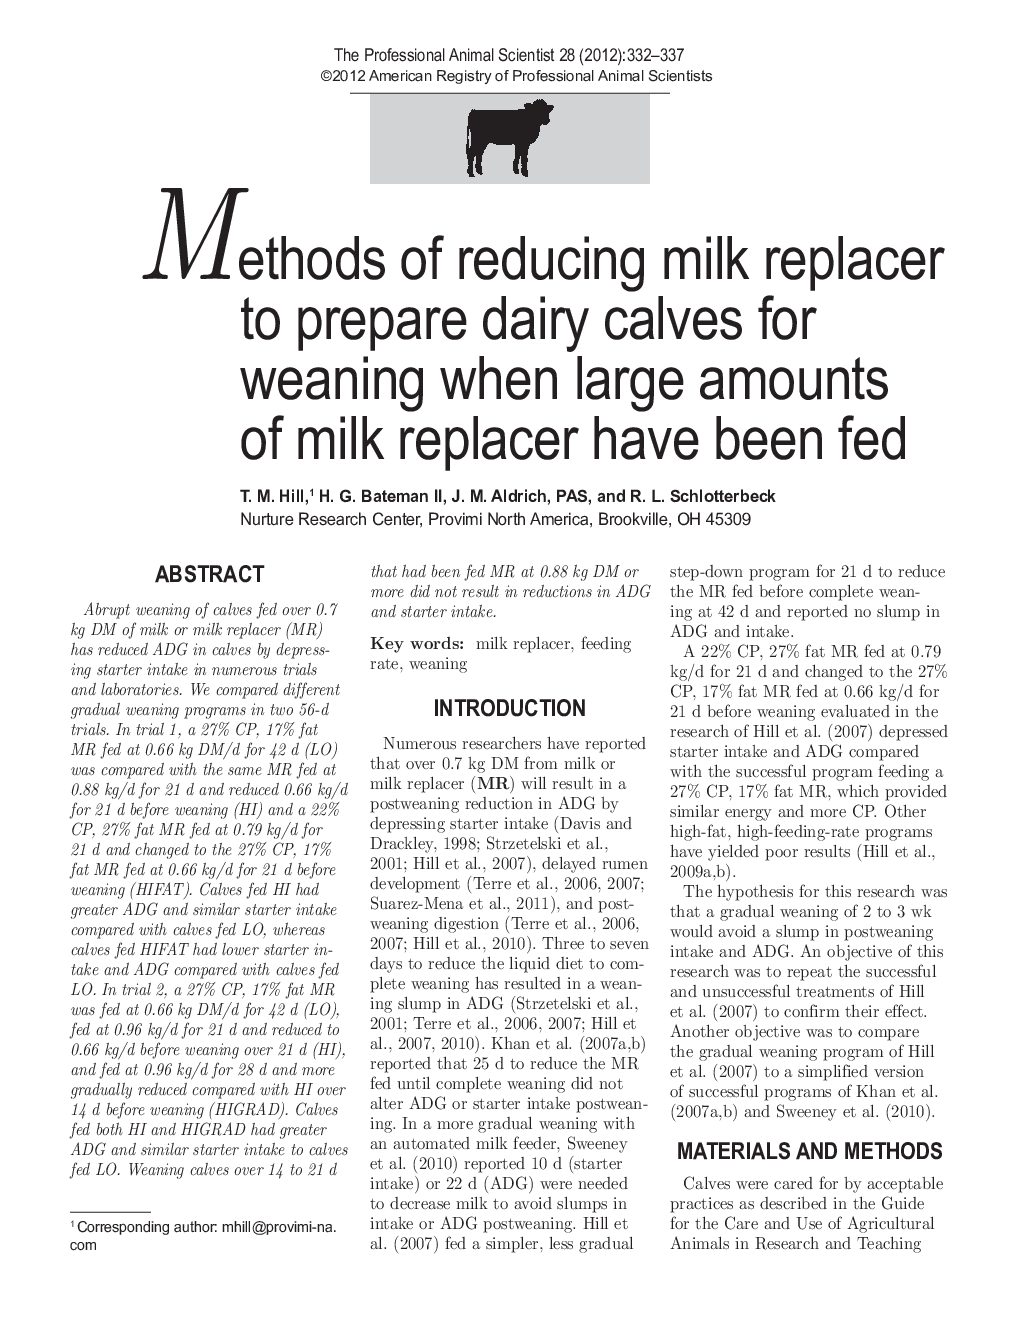 Methods of reducing milk replacer to prepare dairy calves for weaning when large amounts of milk replacer have been fed